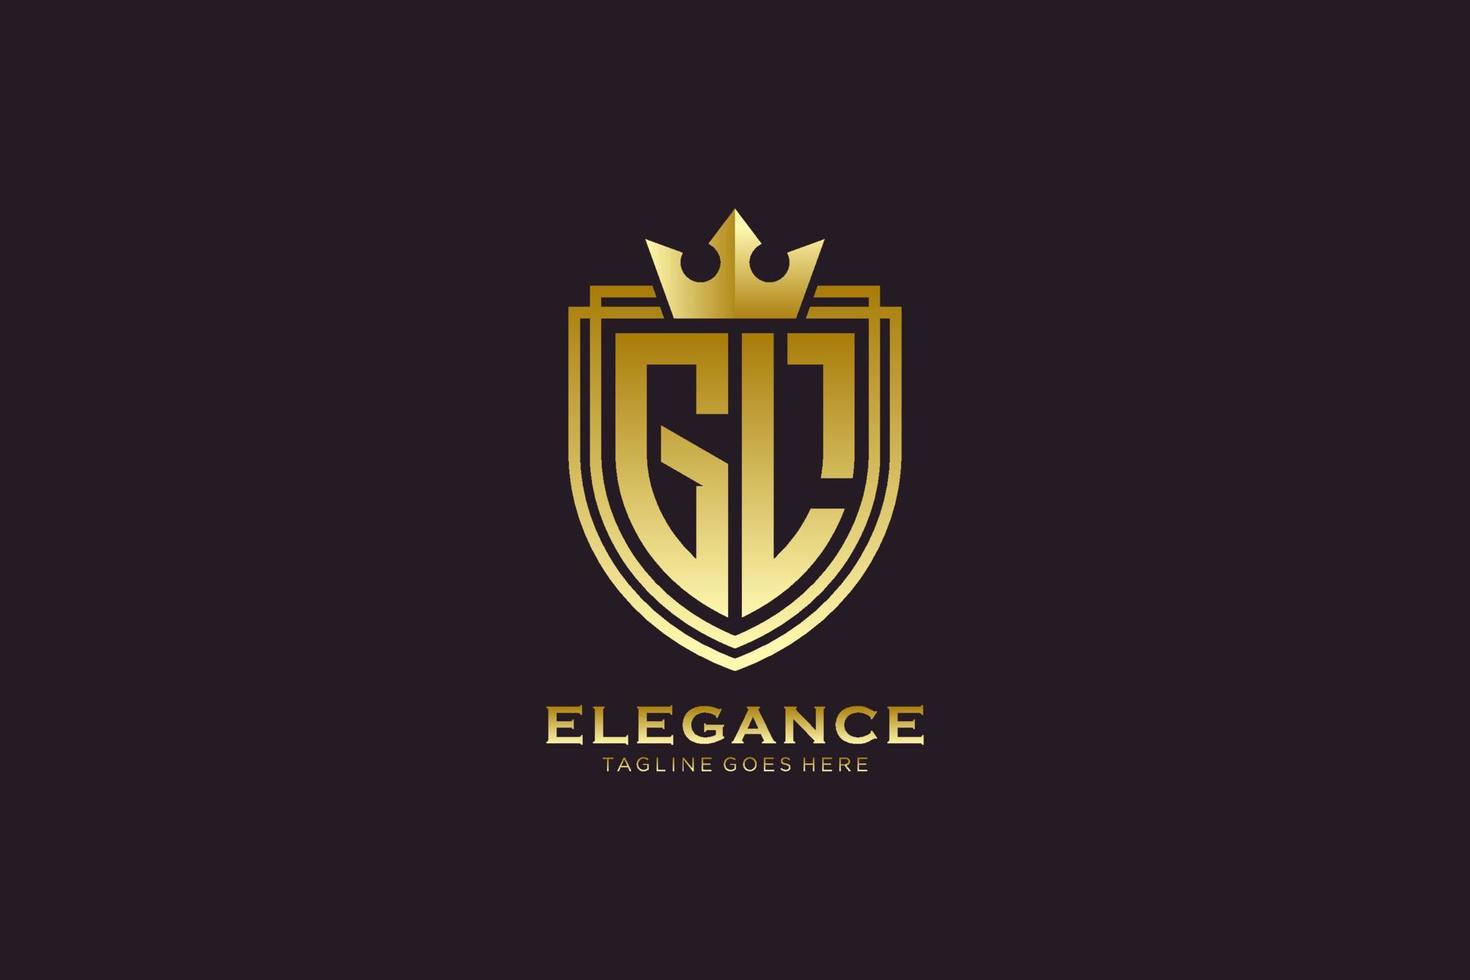 initial GL elegant luxury monogram logo or badge template with scrolls and royal crown - perfect for luxurious branding projects vector